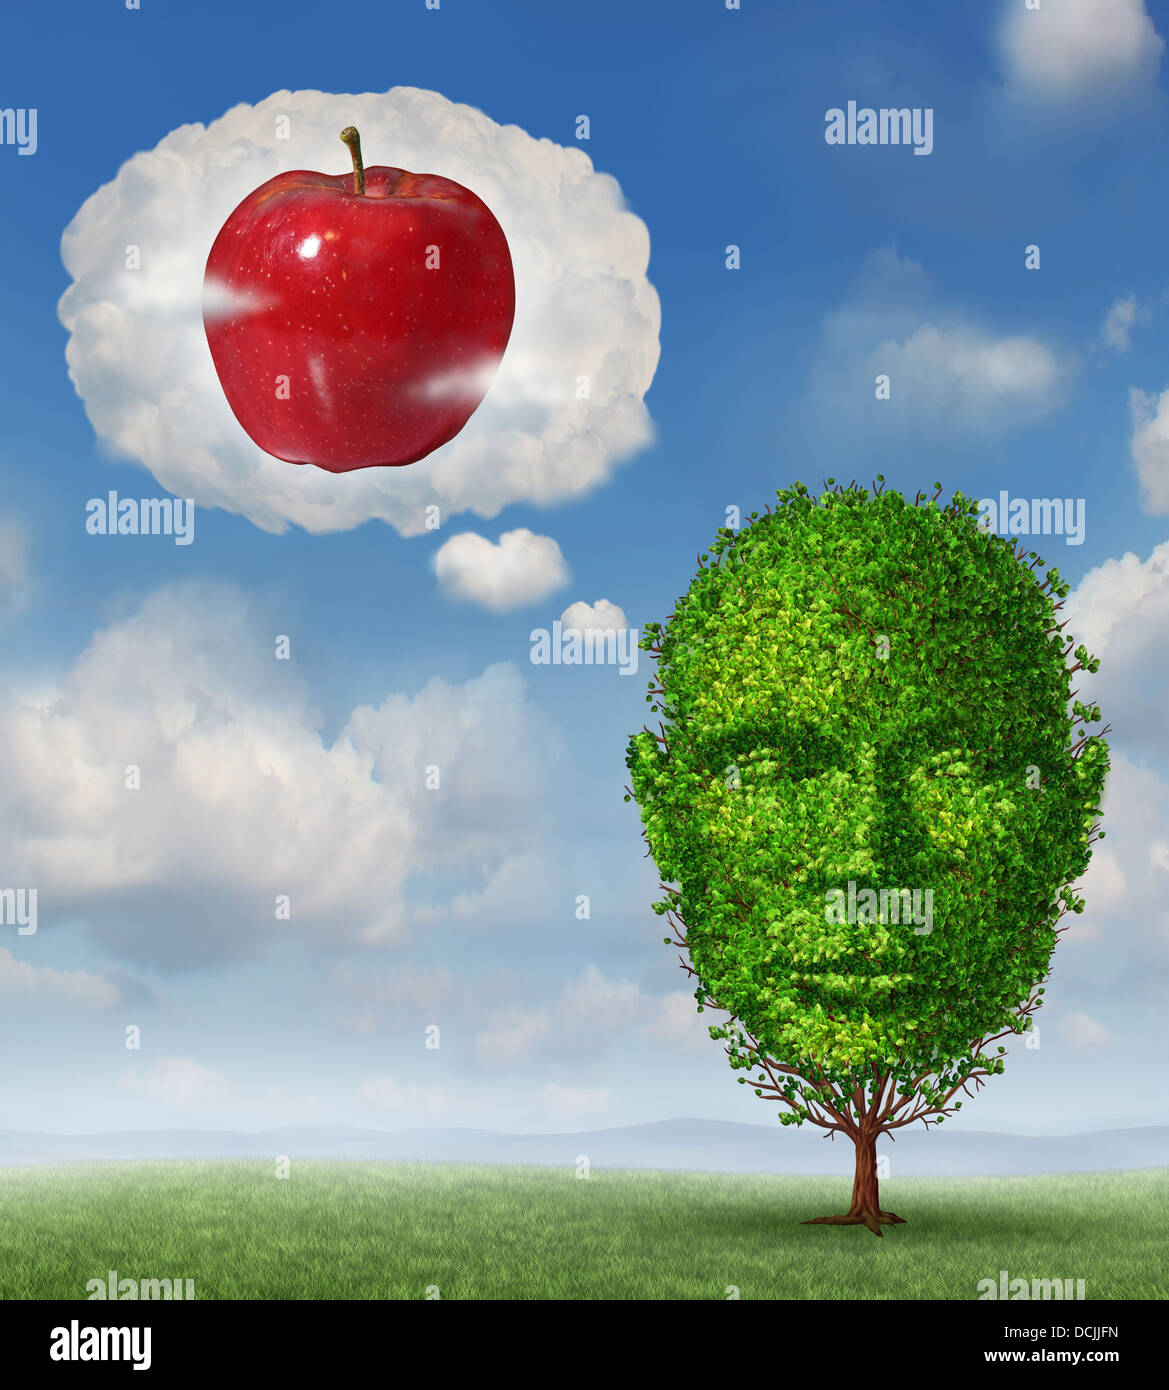 Big ideas business concept with a tree shaped as a human head dreaming and imagining a red apple in a dream bubble made of clouds as a metaphore for planning future profit and fruitful growth success. Stock Photo